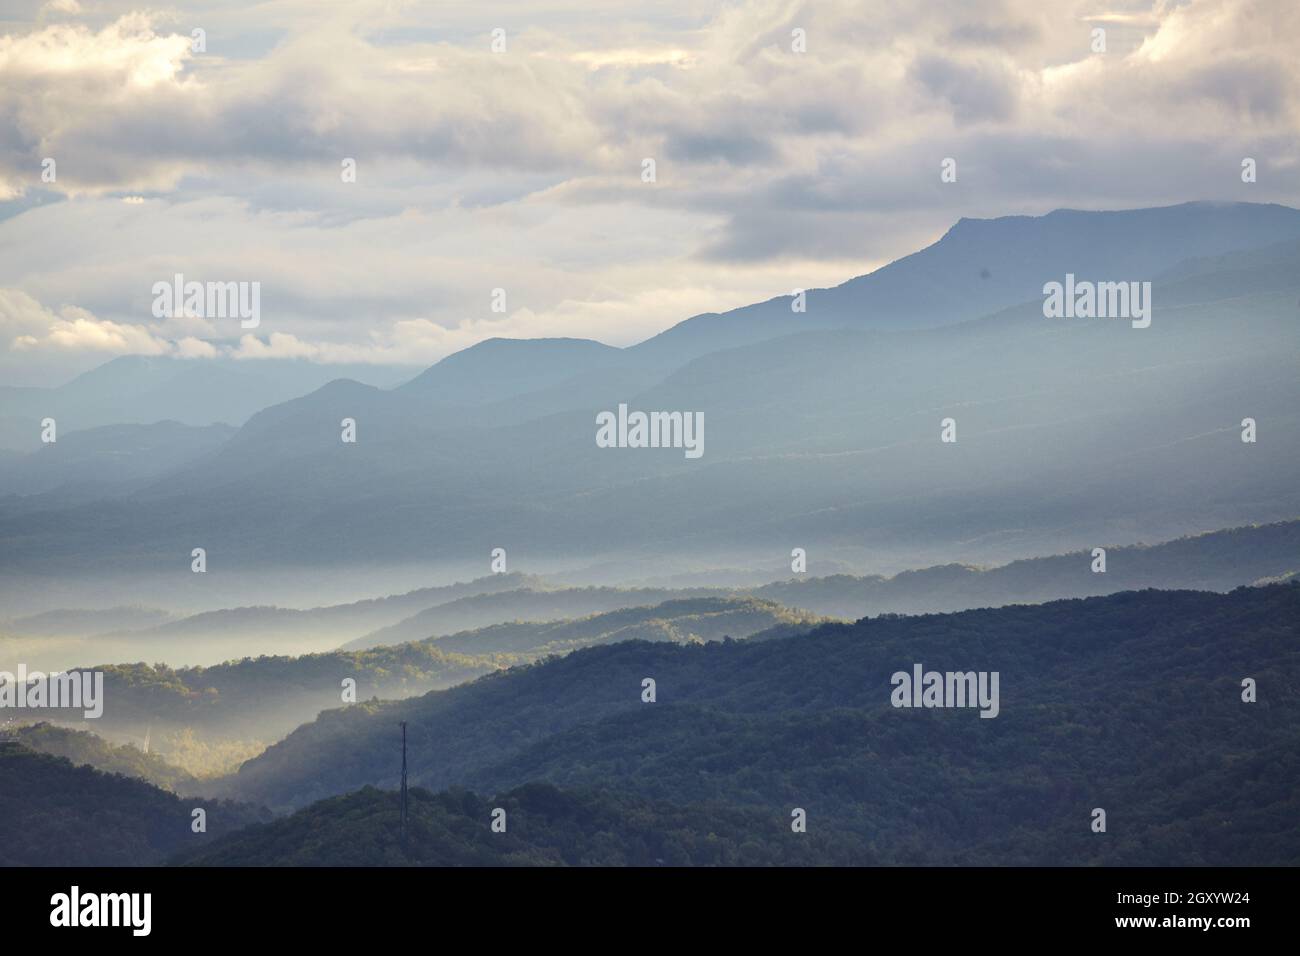 Landscape of the Smokey Mountains with haze between the peaks on an overcast day with one large mountain looming in the background Stock Photo